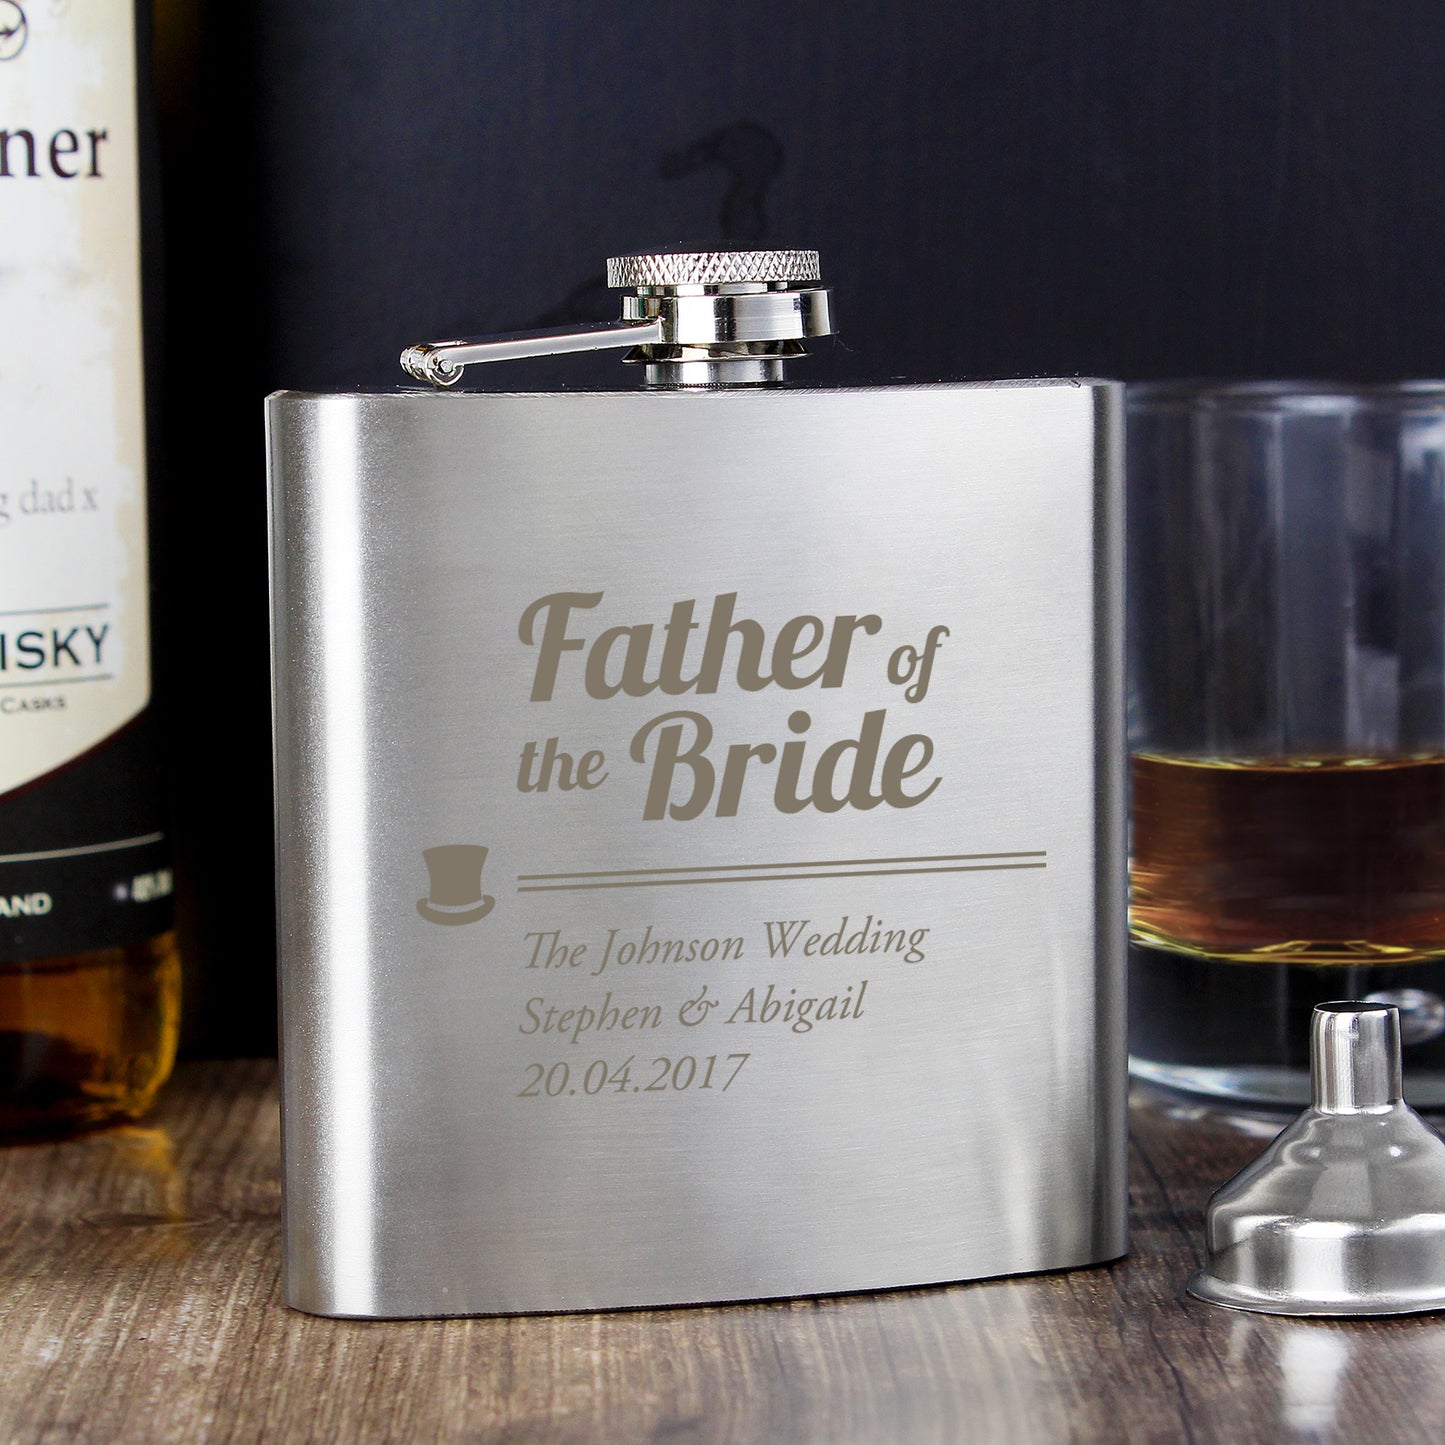 Personalised Father of the Bride Hip Flask - Personalise It!